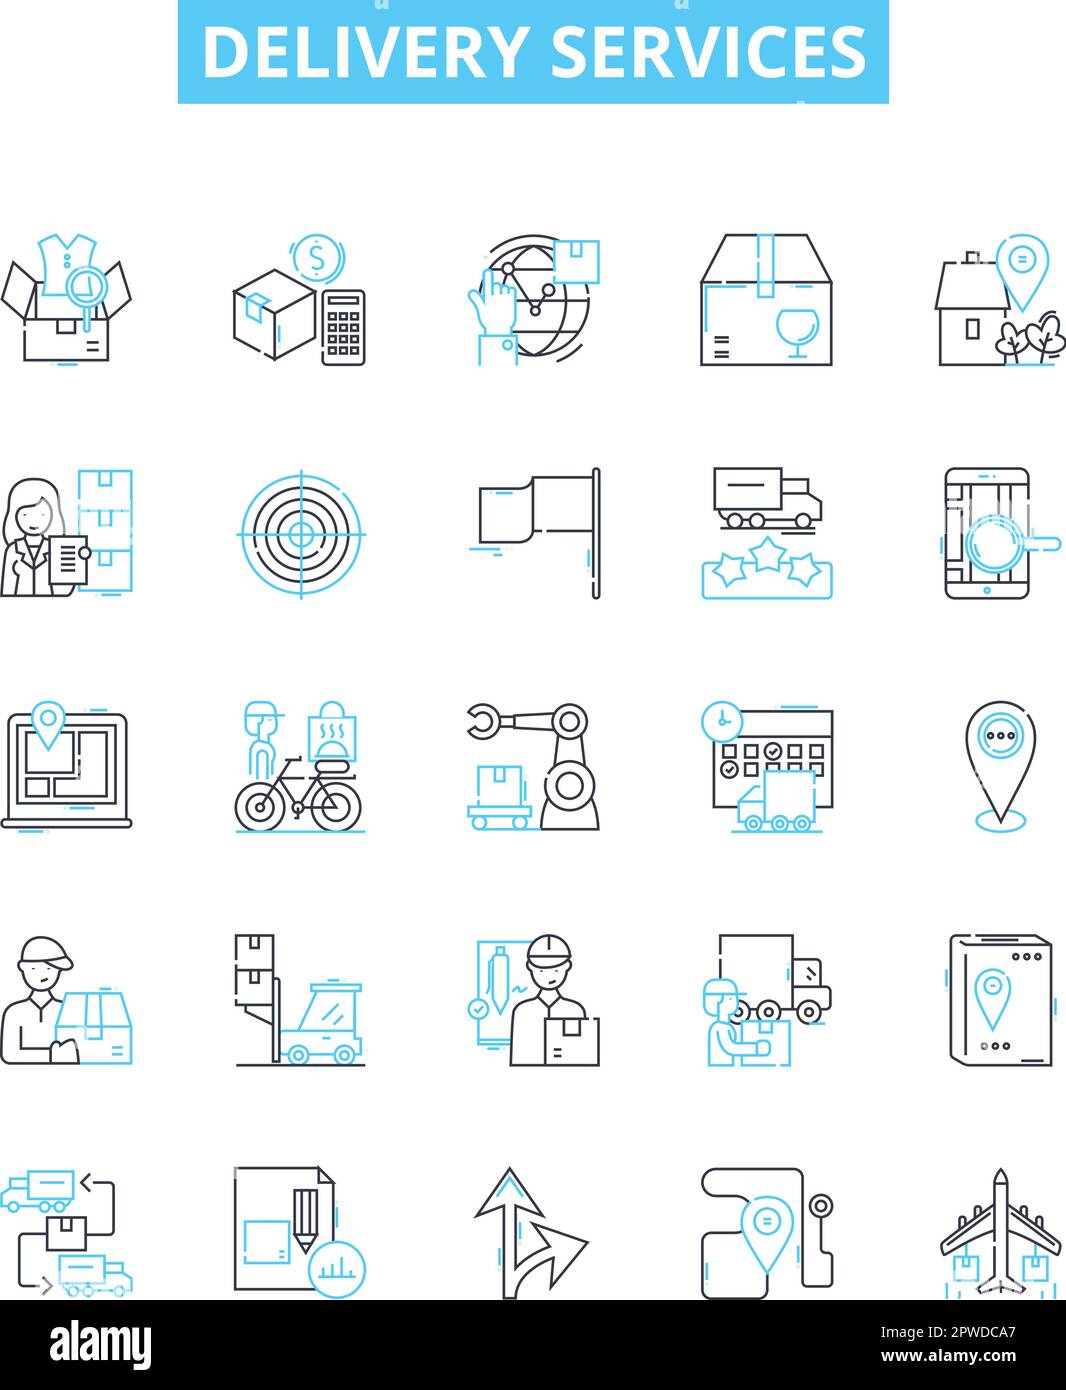 https://c8.alamy.com/comp/2PWDCA7/delivery-services-vector-line-icons-set-courier-delivery-shipping-logistics-parcel-express-packages-illustration-outline-concept-symbols-and-2PWDCA7.jpg